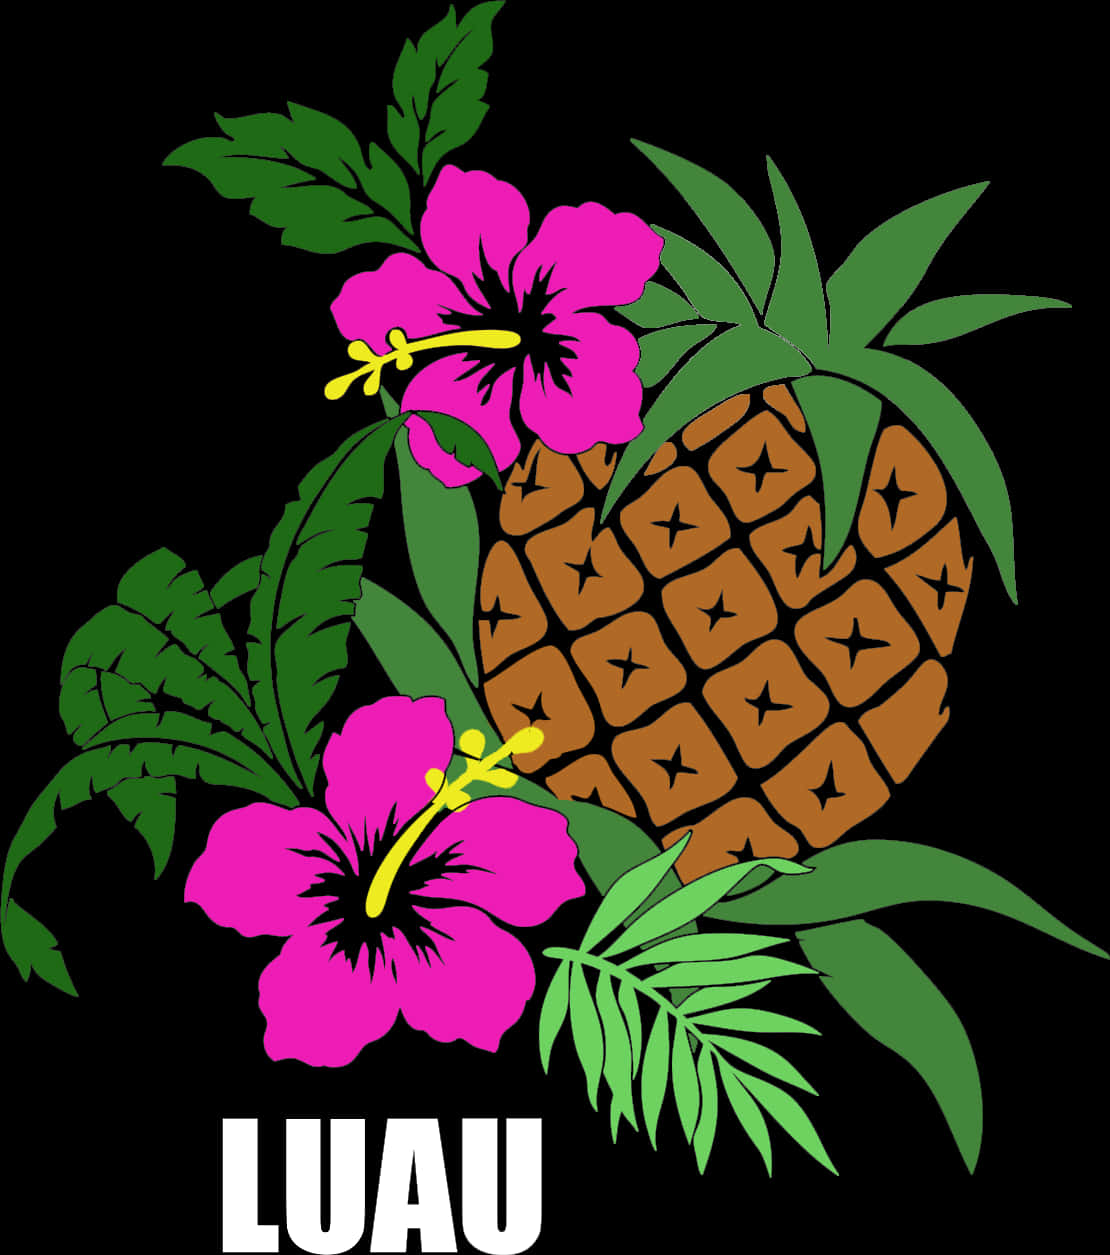 A vibrant luau background with tropical flowers